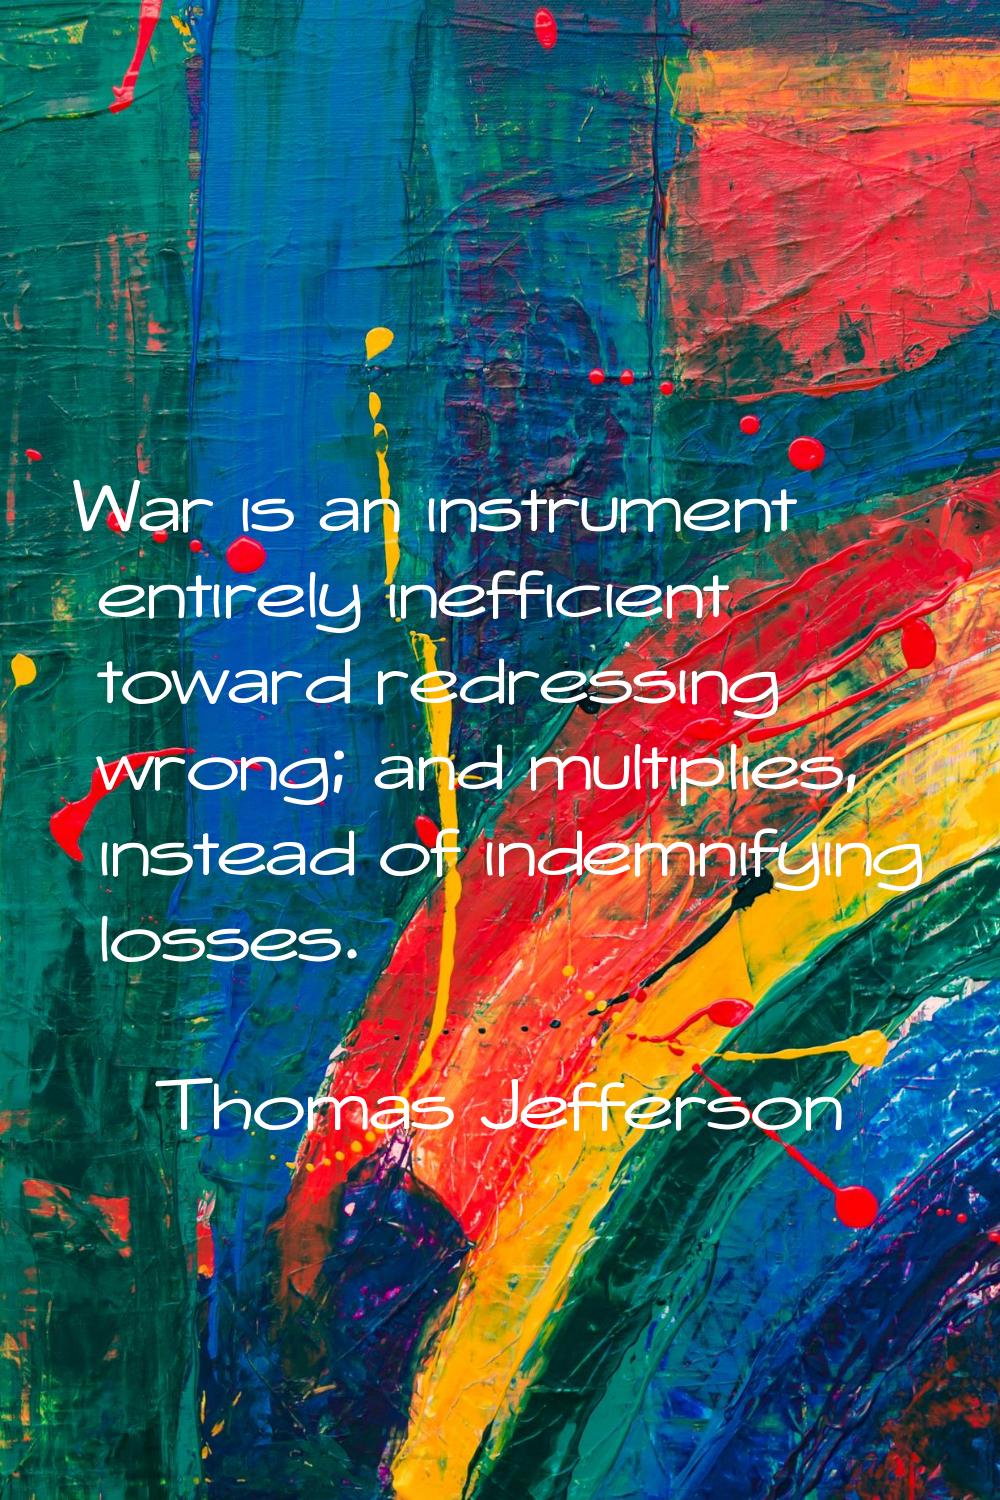 War is an instrument entirely inefficient toward redressing wrong; and multiplies, instead of indem